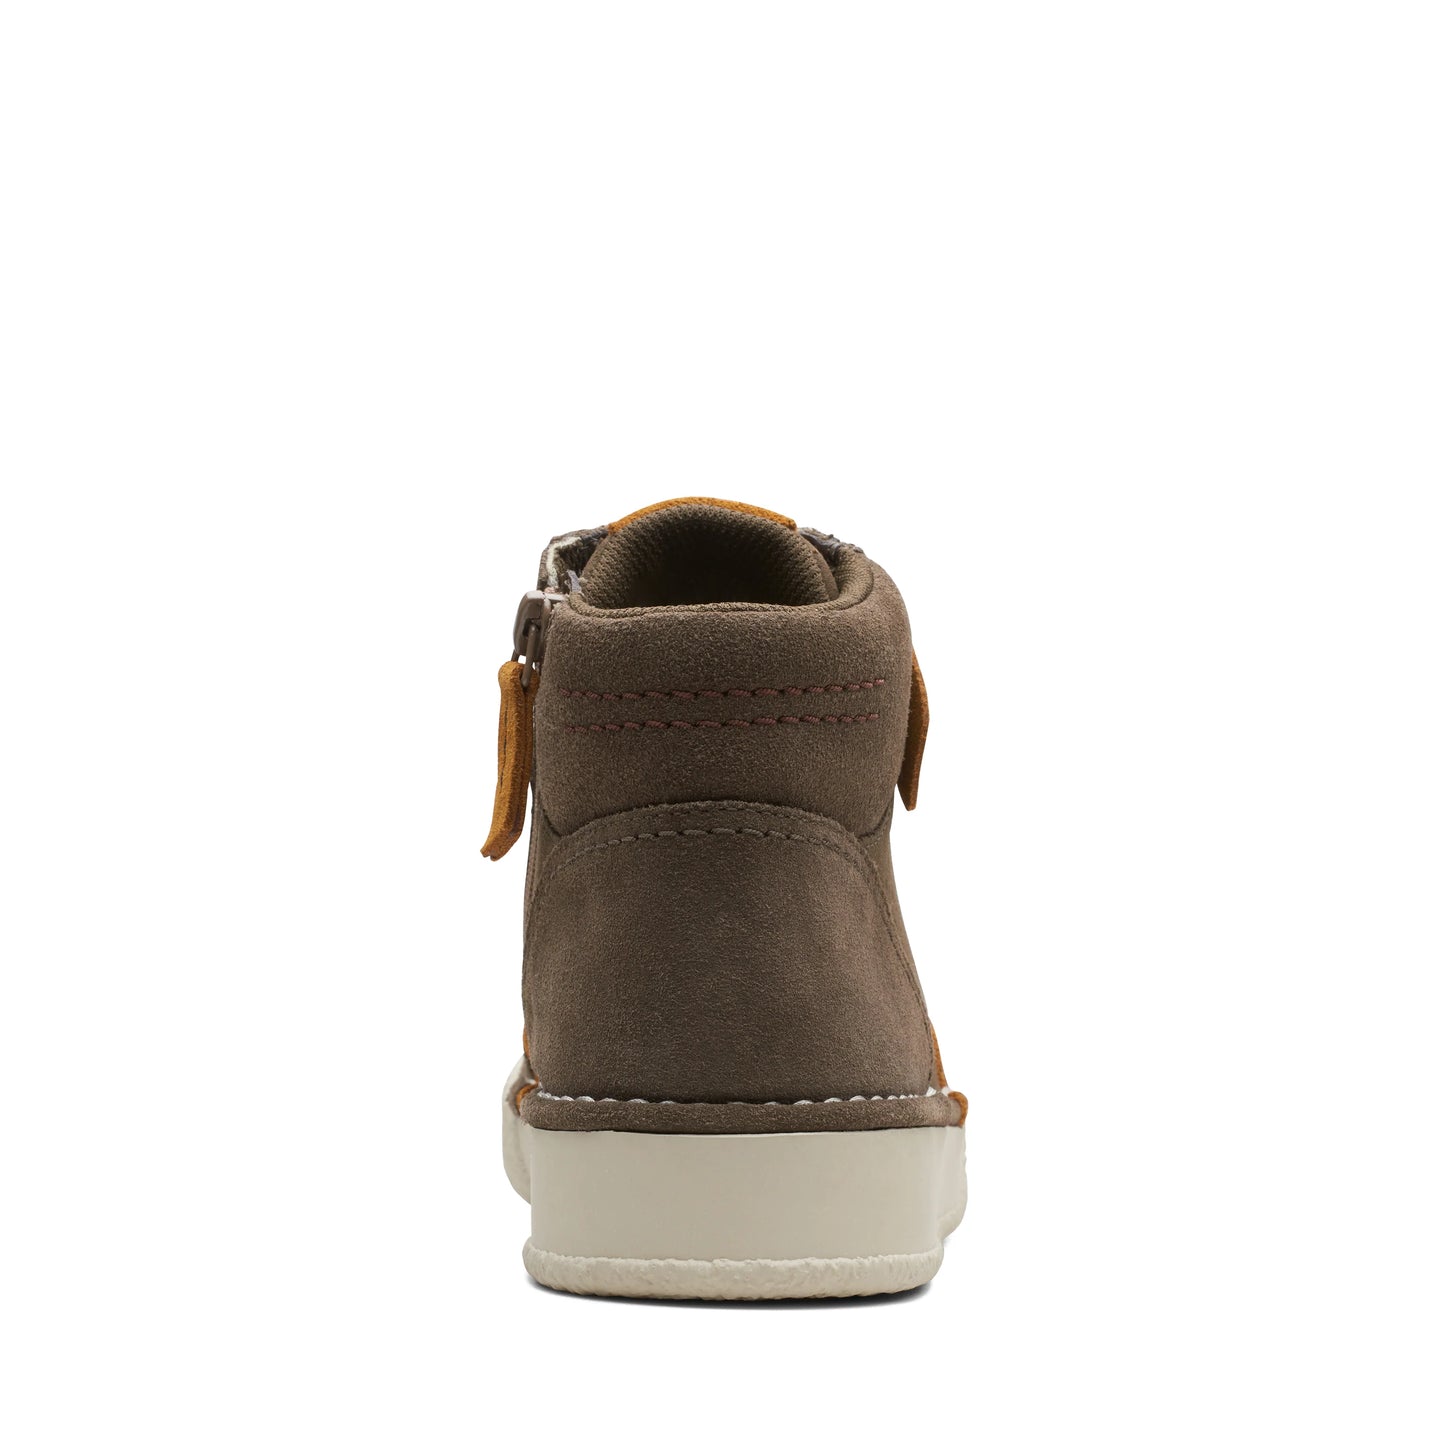 CLARKS | WOMEN BOOTS | CRAFTCUP MID OLIVE COMBI | GREEN